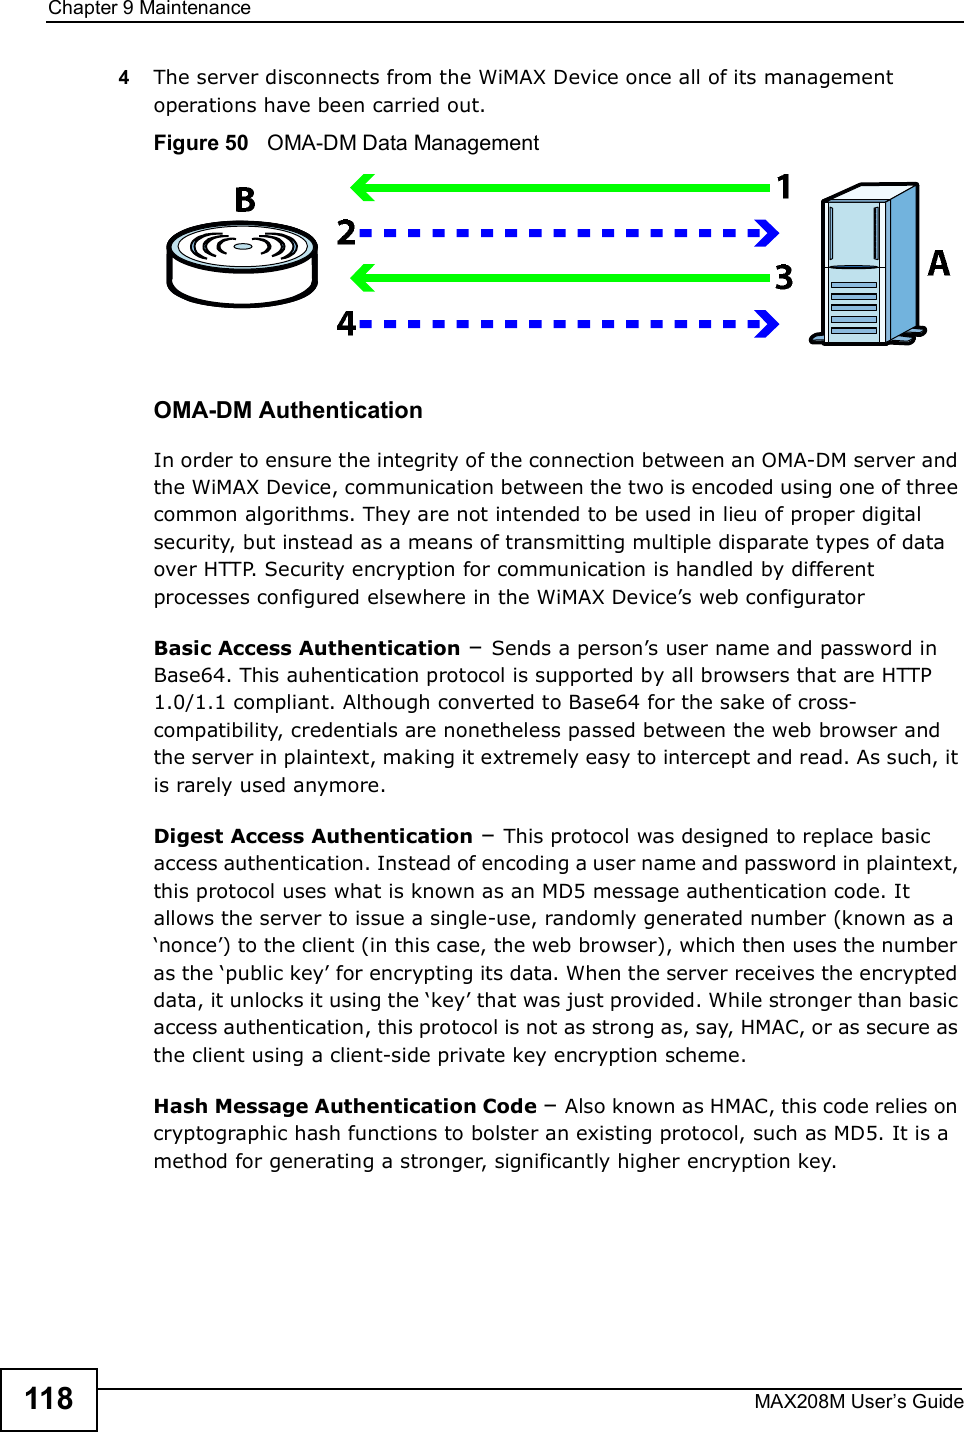 Chapter 9MaintenanceMAX208M User s Guide1184The server disconnects from the WiMAX Device once all of its management operations have been carried out.Figure 50   OMA-DM Data ManagementOMA-DM AuthenticationIn order to ensure the integrity of the connection between an OMA-DM server and the WiMAX Device, communication between the two is encoded using one of three common algorithms. They are not intended to be used in lieu of proper digital security, but instead as a means of transmitting multiple disparate types of data over HTTP. Security encryption for communication is handled by different processes configured elsewhere in the WiMAX Device s web configuratorBasic Access Authentication $ Sends a person s user name and password in Base64. This auhentication protocol is supported by all browsers that are HTTP 1.0/1.1 compliant. Although converted to Base64 for the sake of cross-compatibility, credentials are nonetheless passed between the web browser and the server in plaintext, making it extremely easy to intercept and read. As such, it is rarely used anymore.Digest Access Authentication $ This protocol was designed to replace basic access authentication. Instead of encoding a user name and password in plaintext, this protocol uses what is known as an MD5 message authentication code. It allows the server to issue a single-use, randomly generated number (known as a %nonce ) to the client (in this case, the web browser), which then uses the number as the %public key  for encrypting its data. When the server receives the encrypted data, it unlocks it using the %key  that was just provided. While stronger than basic access authentication, this protocol is not as strong as, say, HMAC, or as secure as the client using a client-side private key encryption scheme. Hash Message Authentication Code $ Also known as HMAC, this code relies on cryptographic hash functions to bolster an existing protocol, such as MD5. It is a method for generating a stronger, significantly higher encryption key.